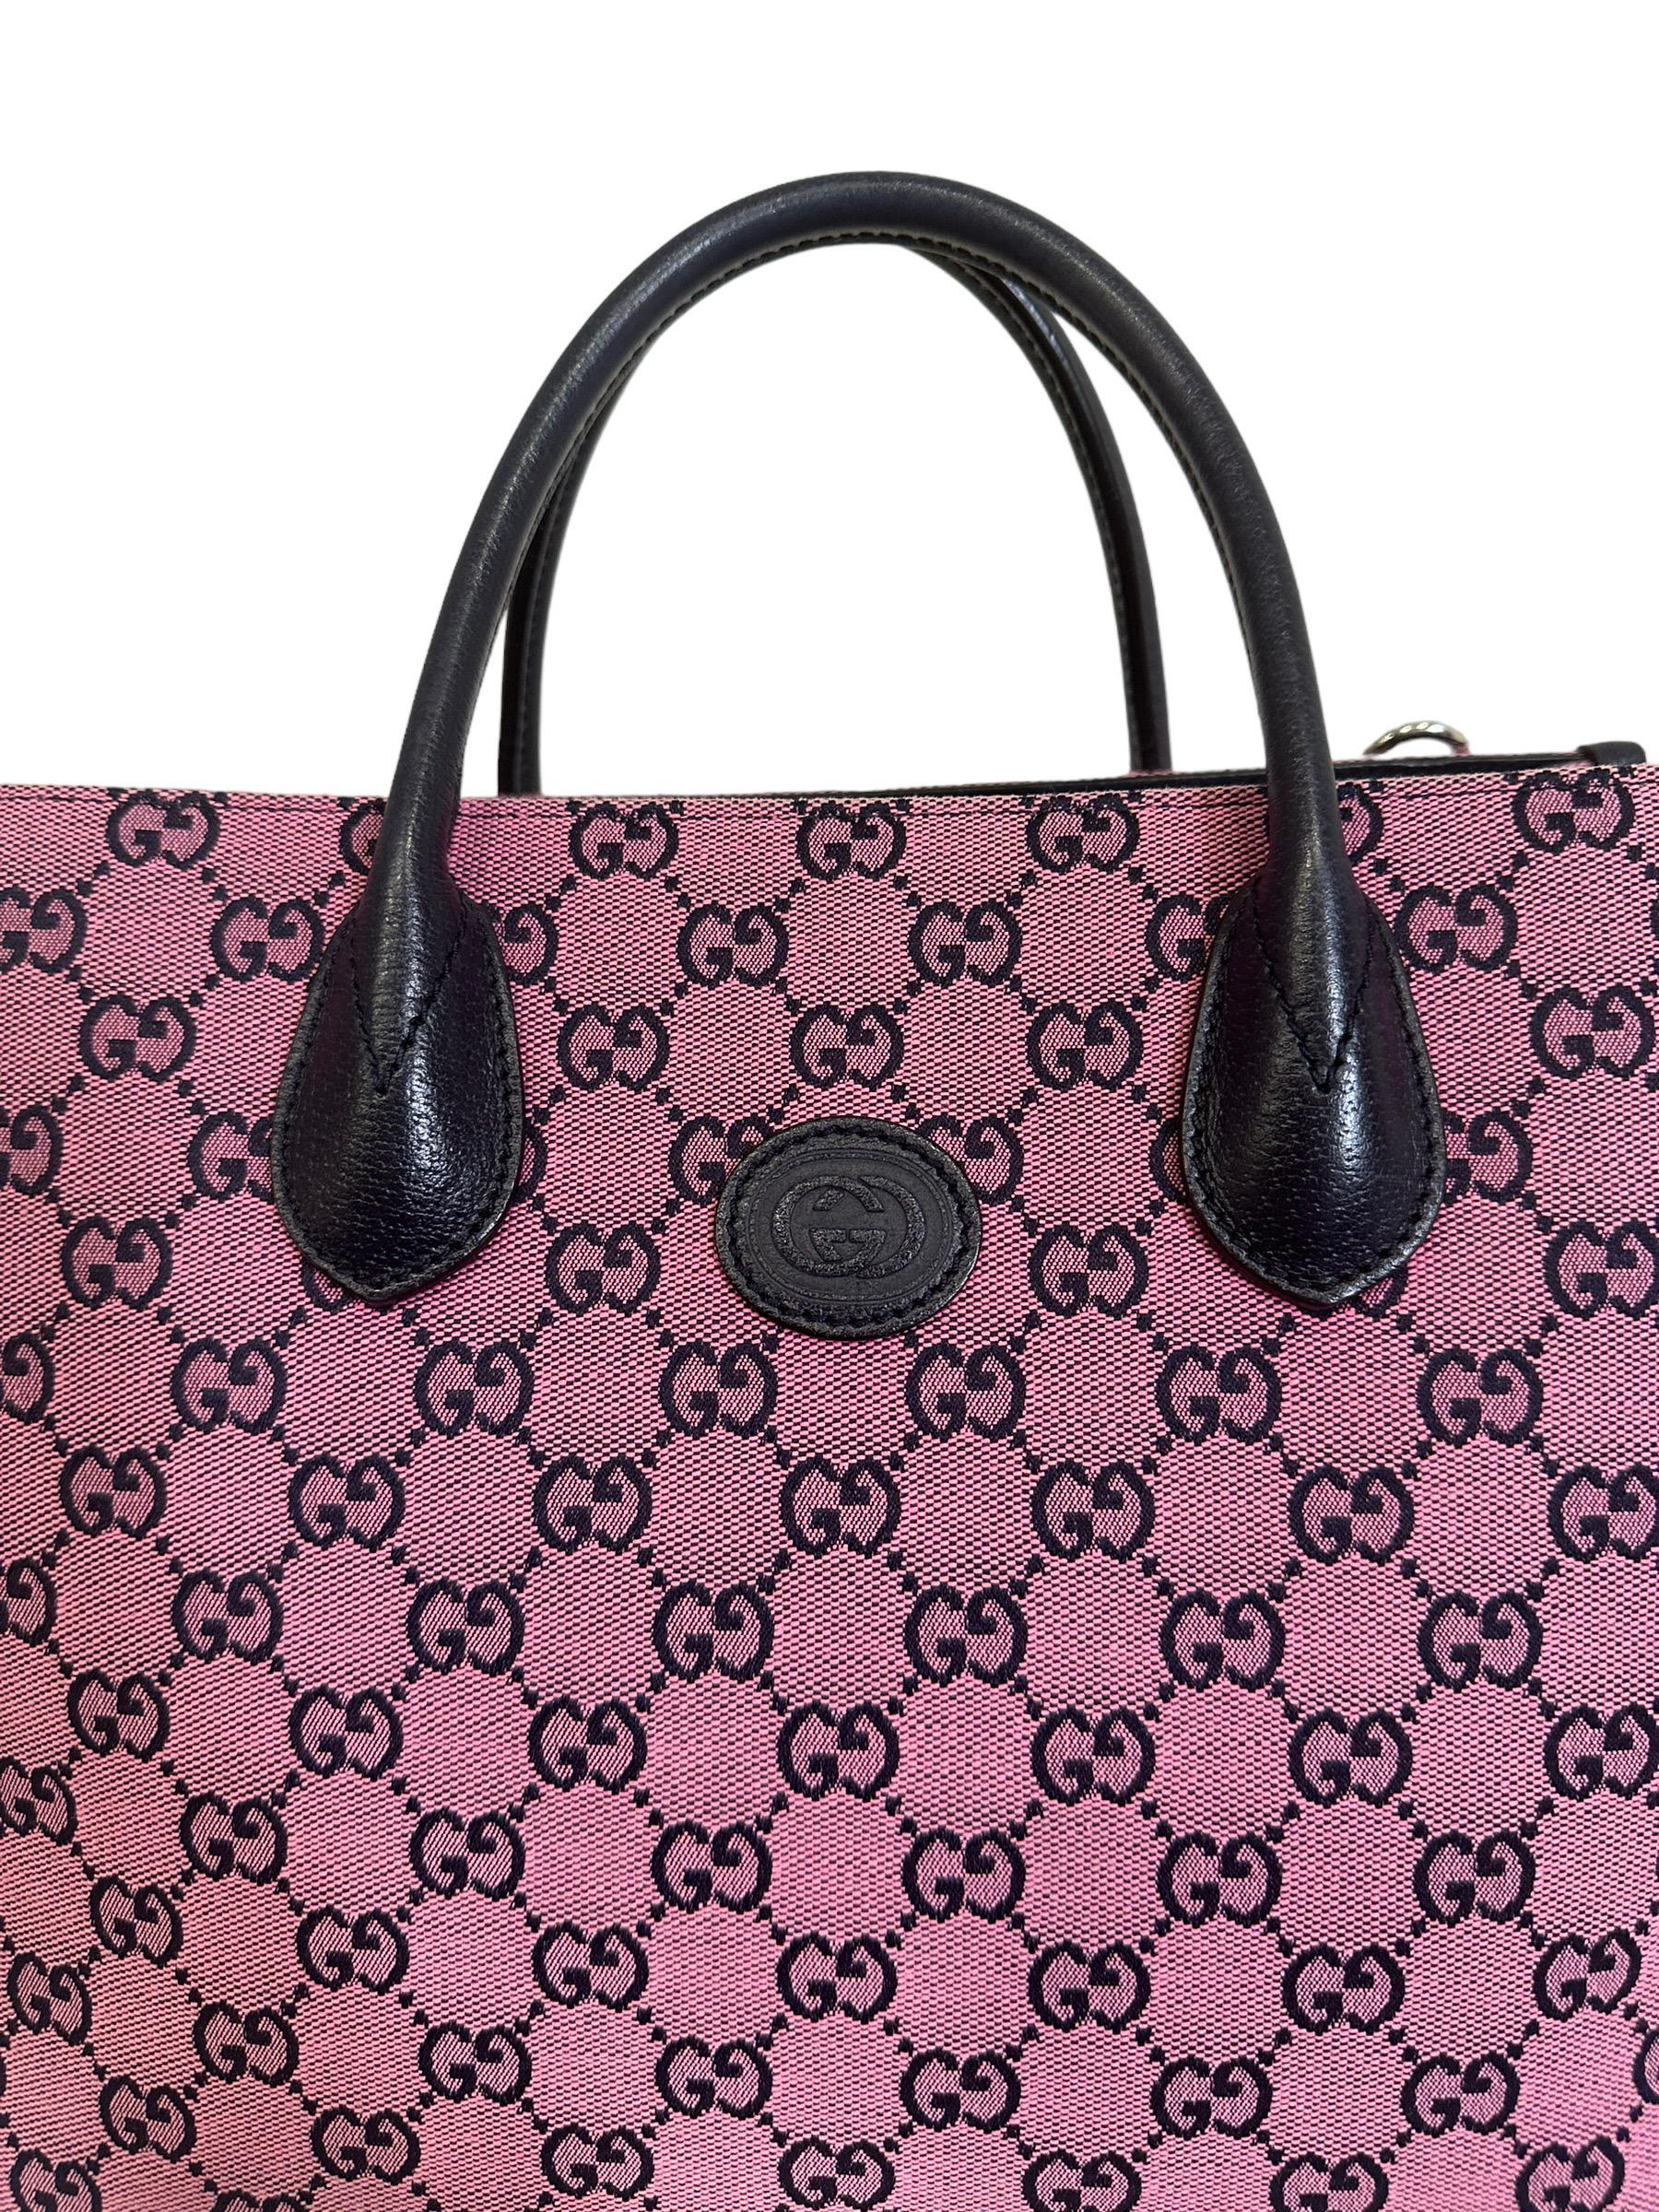 Gucci signed bag, tote model, made of pink GG supreme canvas with blue leather inserts and silver hardware. Equipped with double rigid leather handle, and removable and adjustable shoulder strap. Equipped with a closure with a small central hook,